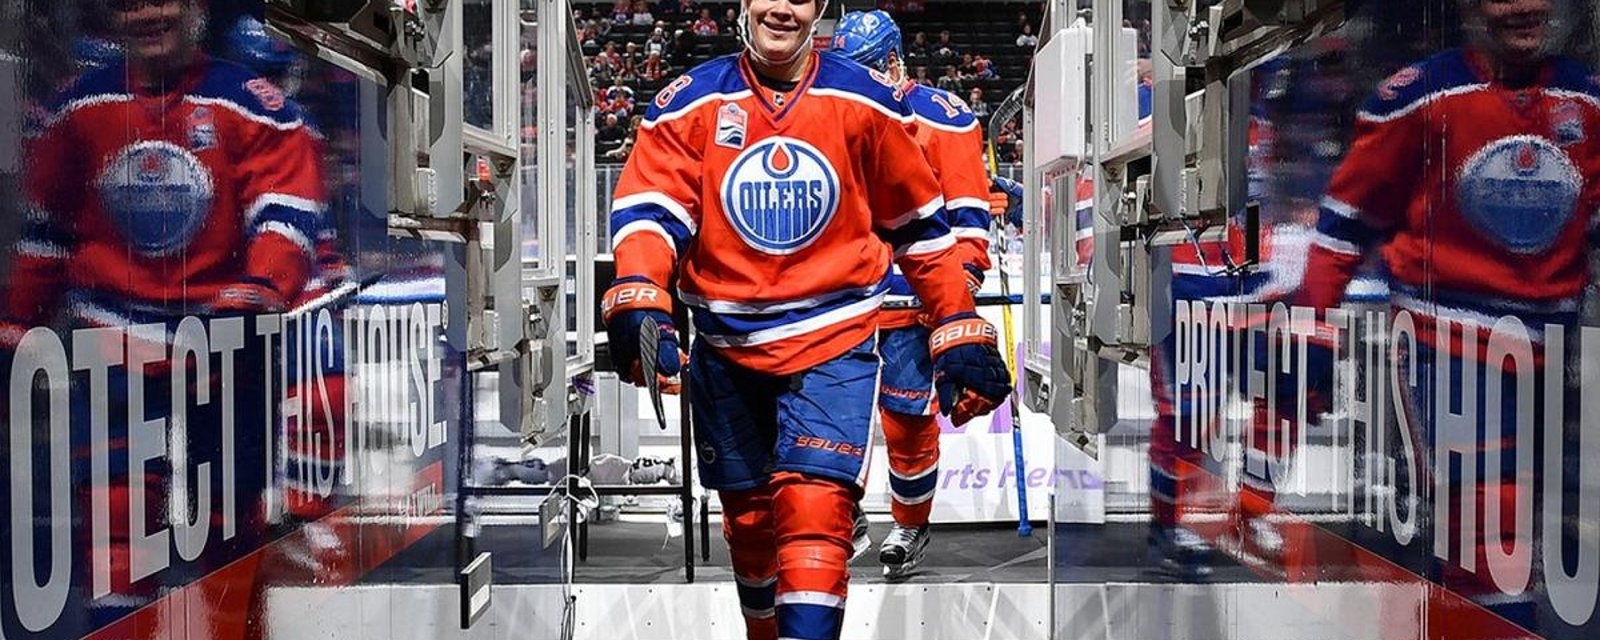 Breaking: Oilers star has been named to international team for the World Championship.